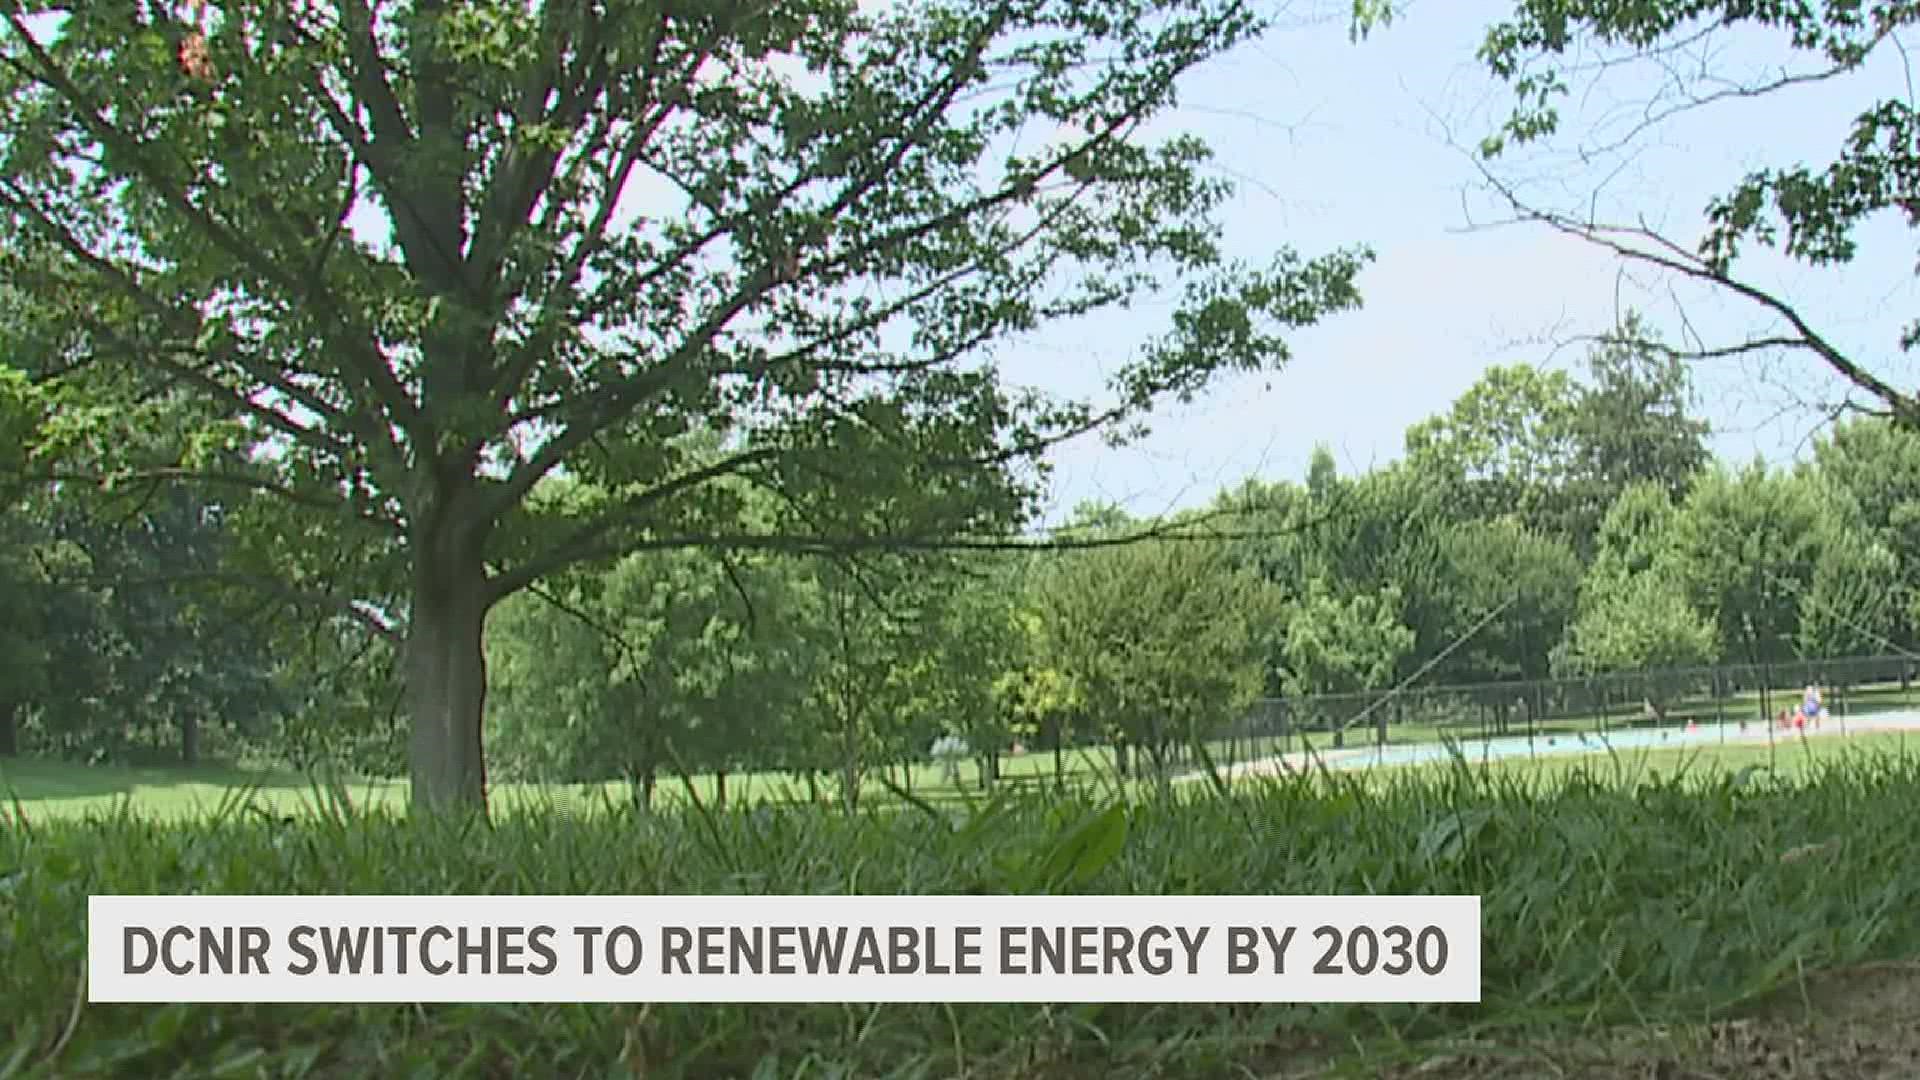 To reduce their carbon footprint the DCNR decided to switch over to produced or purchased renewable sources to run their state and local parks.